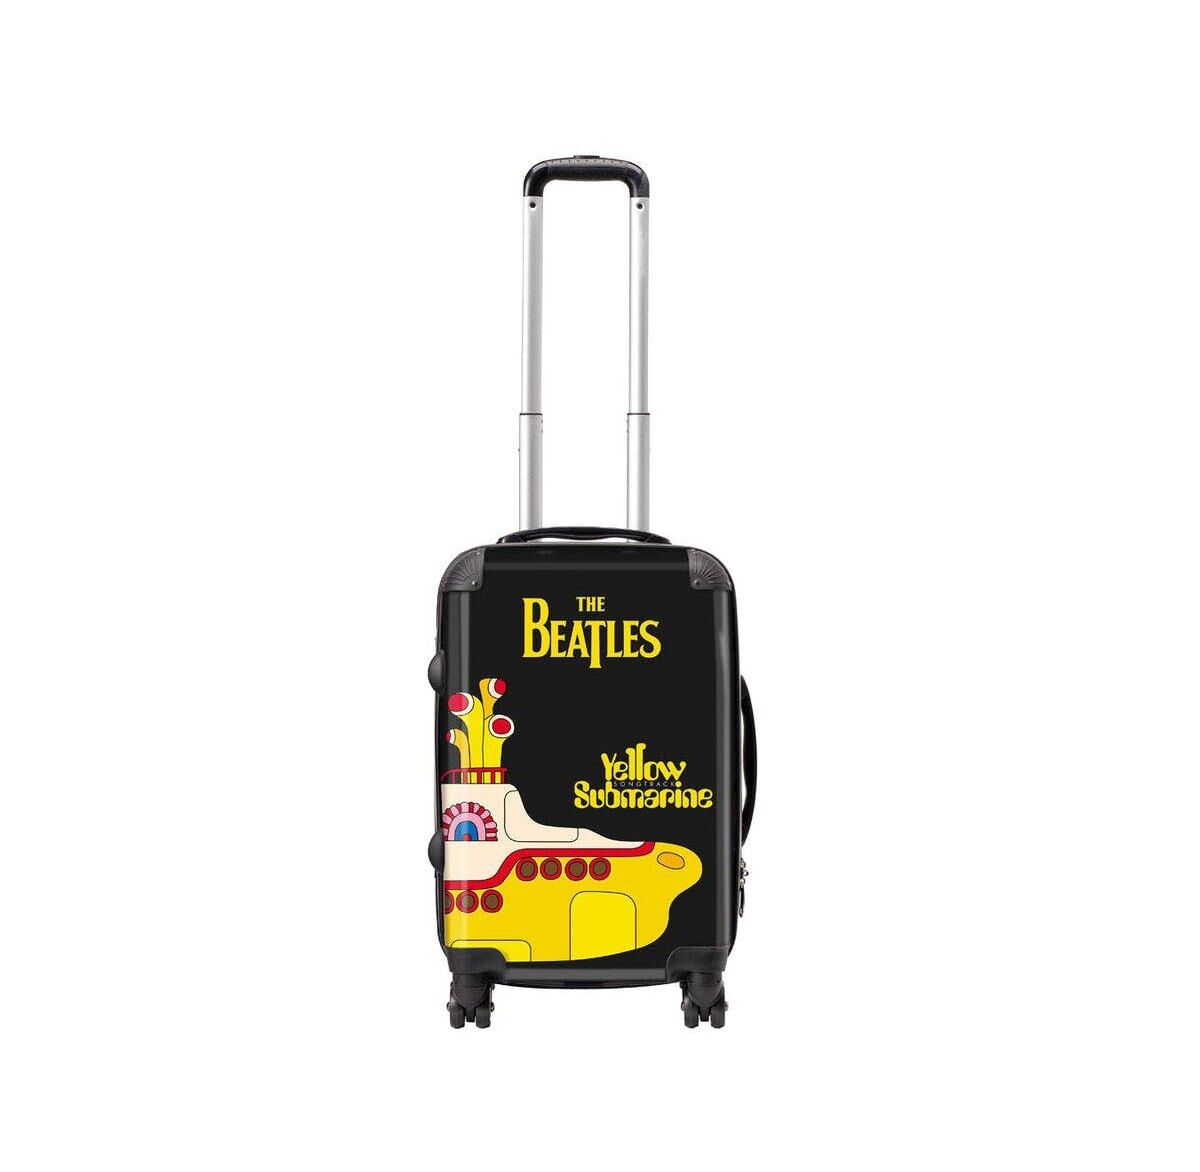 Rocksax The Beatles Tour Series Luggage - Yellow Submarine Film Ii - Small - Carry On - Multi-colored